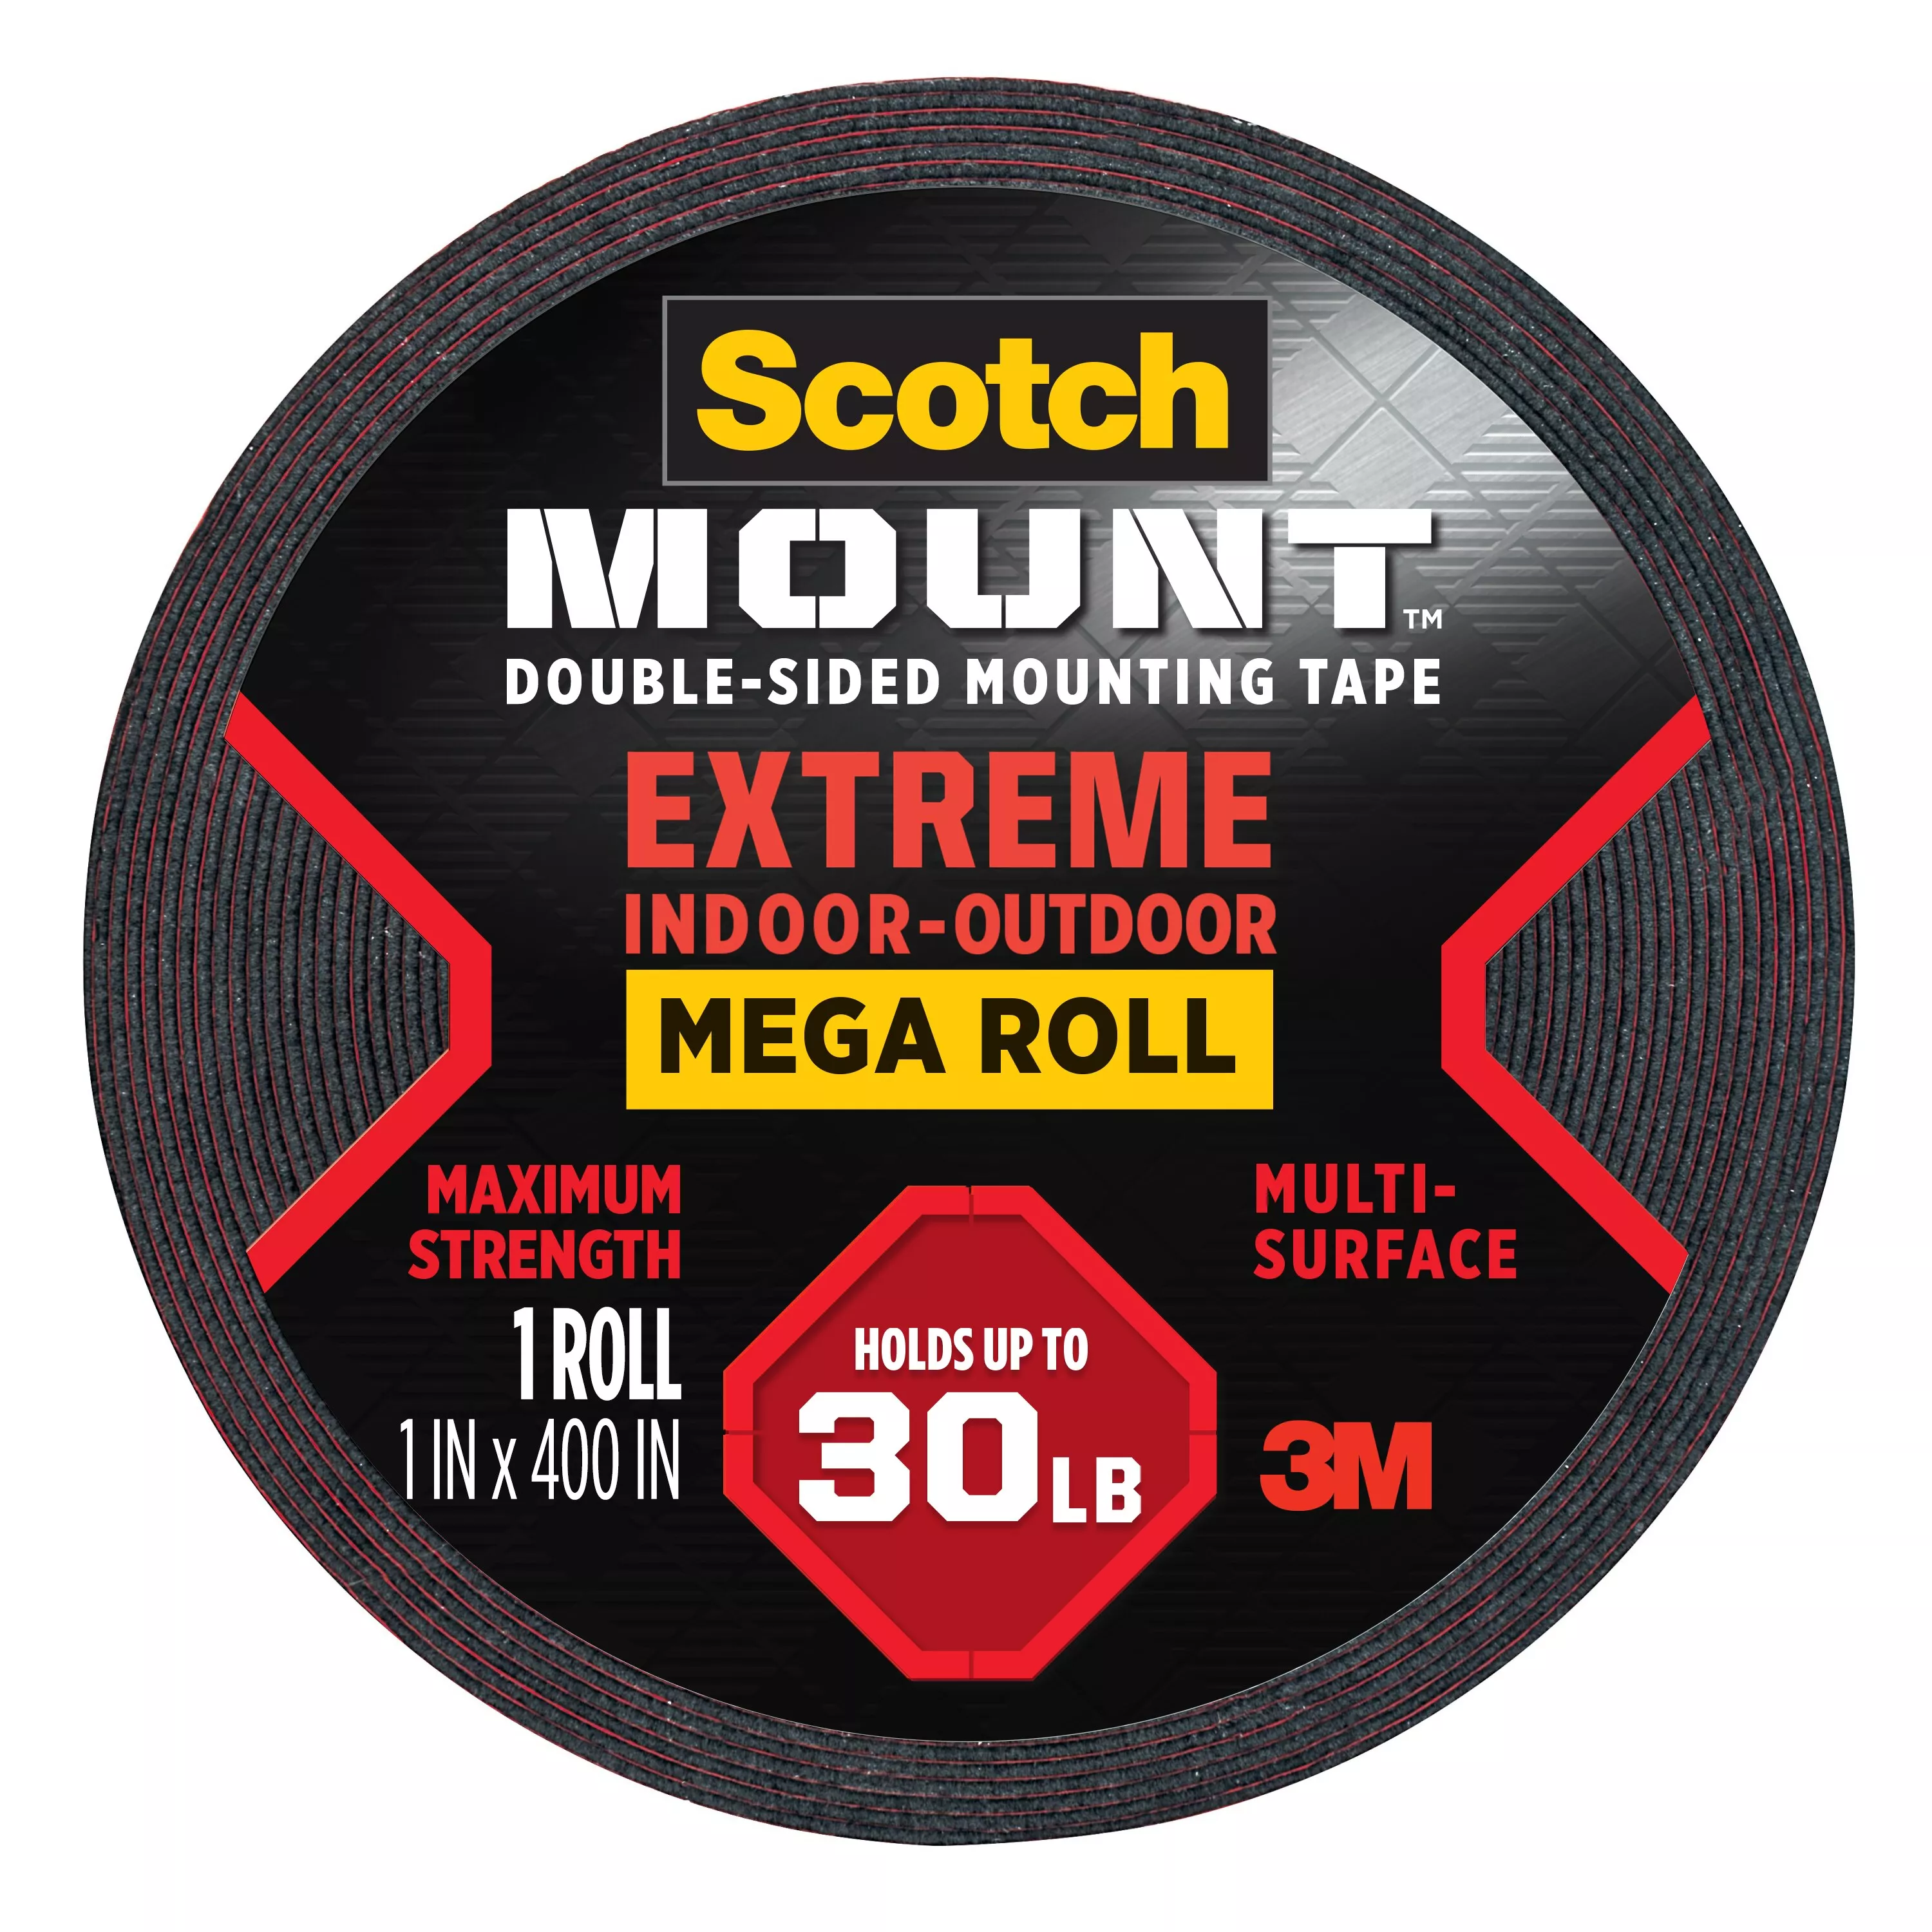 SKU 7100205645 | Scotch-Mount™ Extreme Double-Sided Mounting Tape Mega Roll 414H-LONG-DC